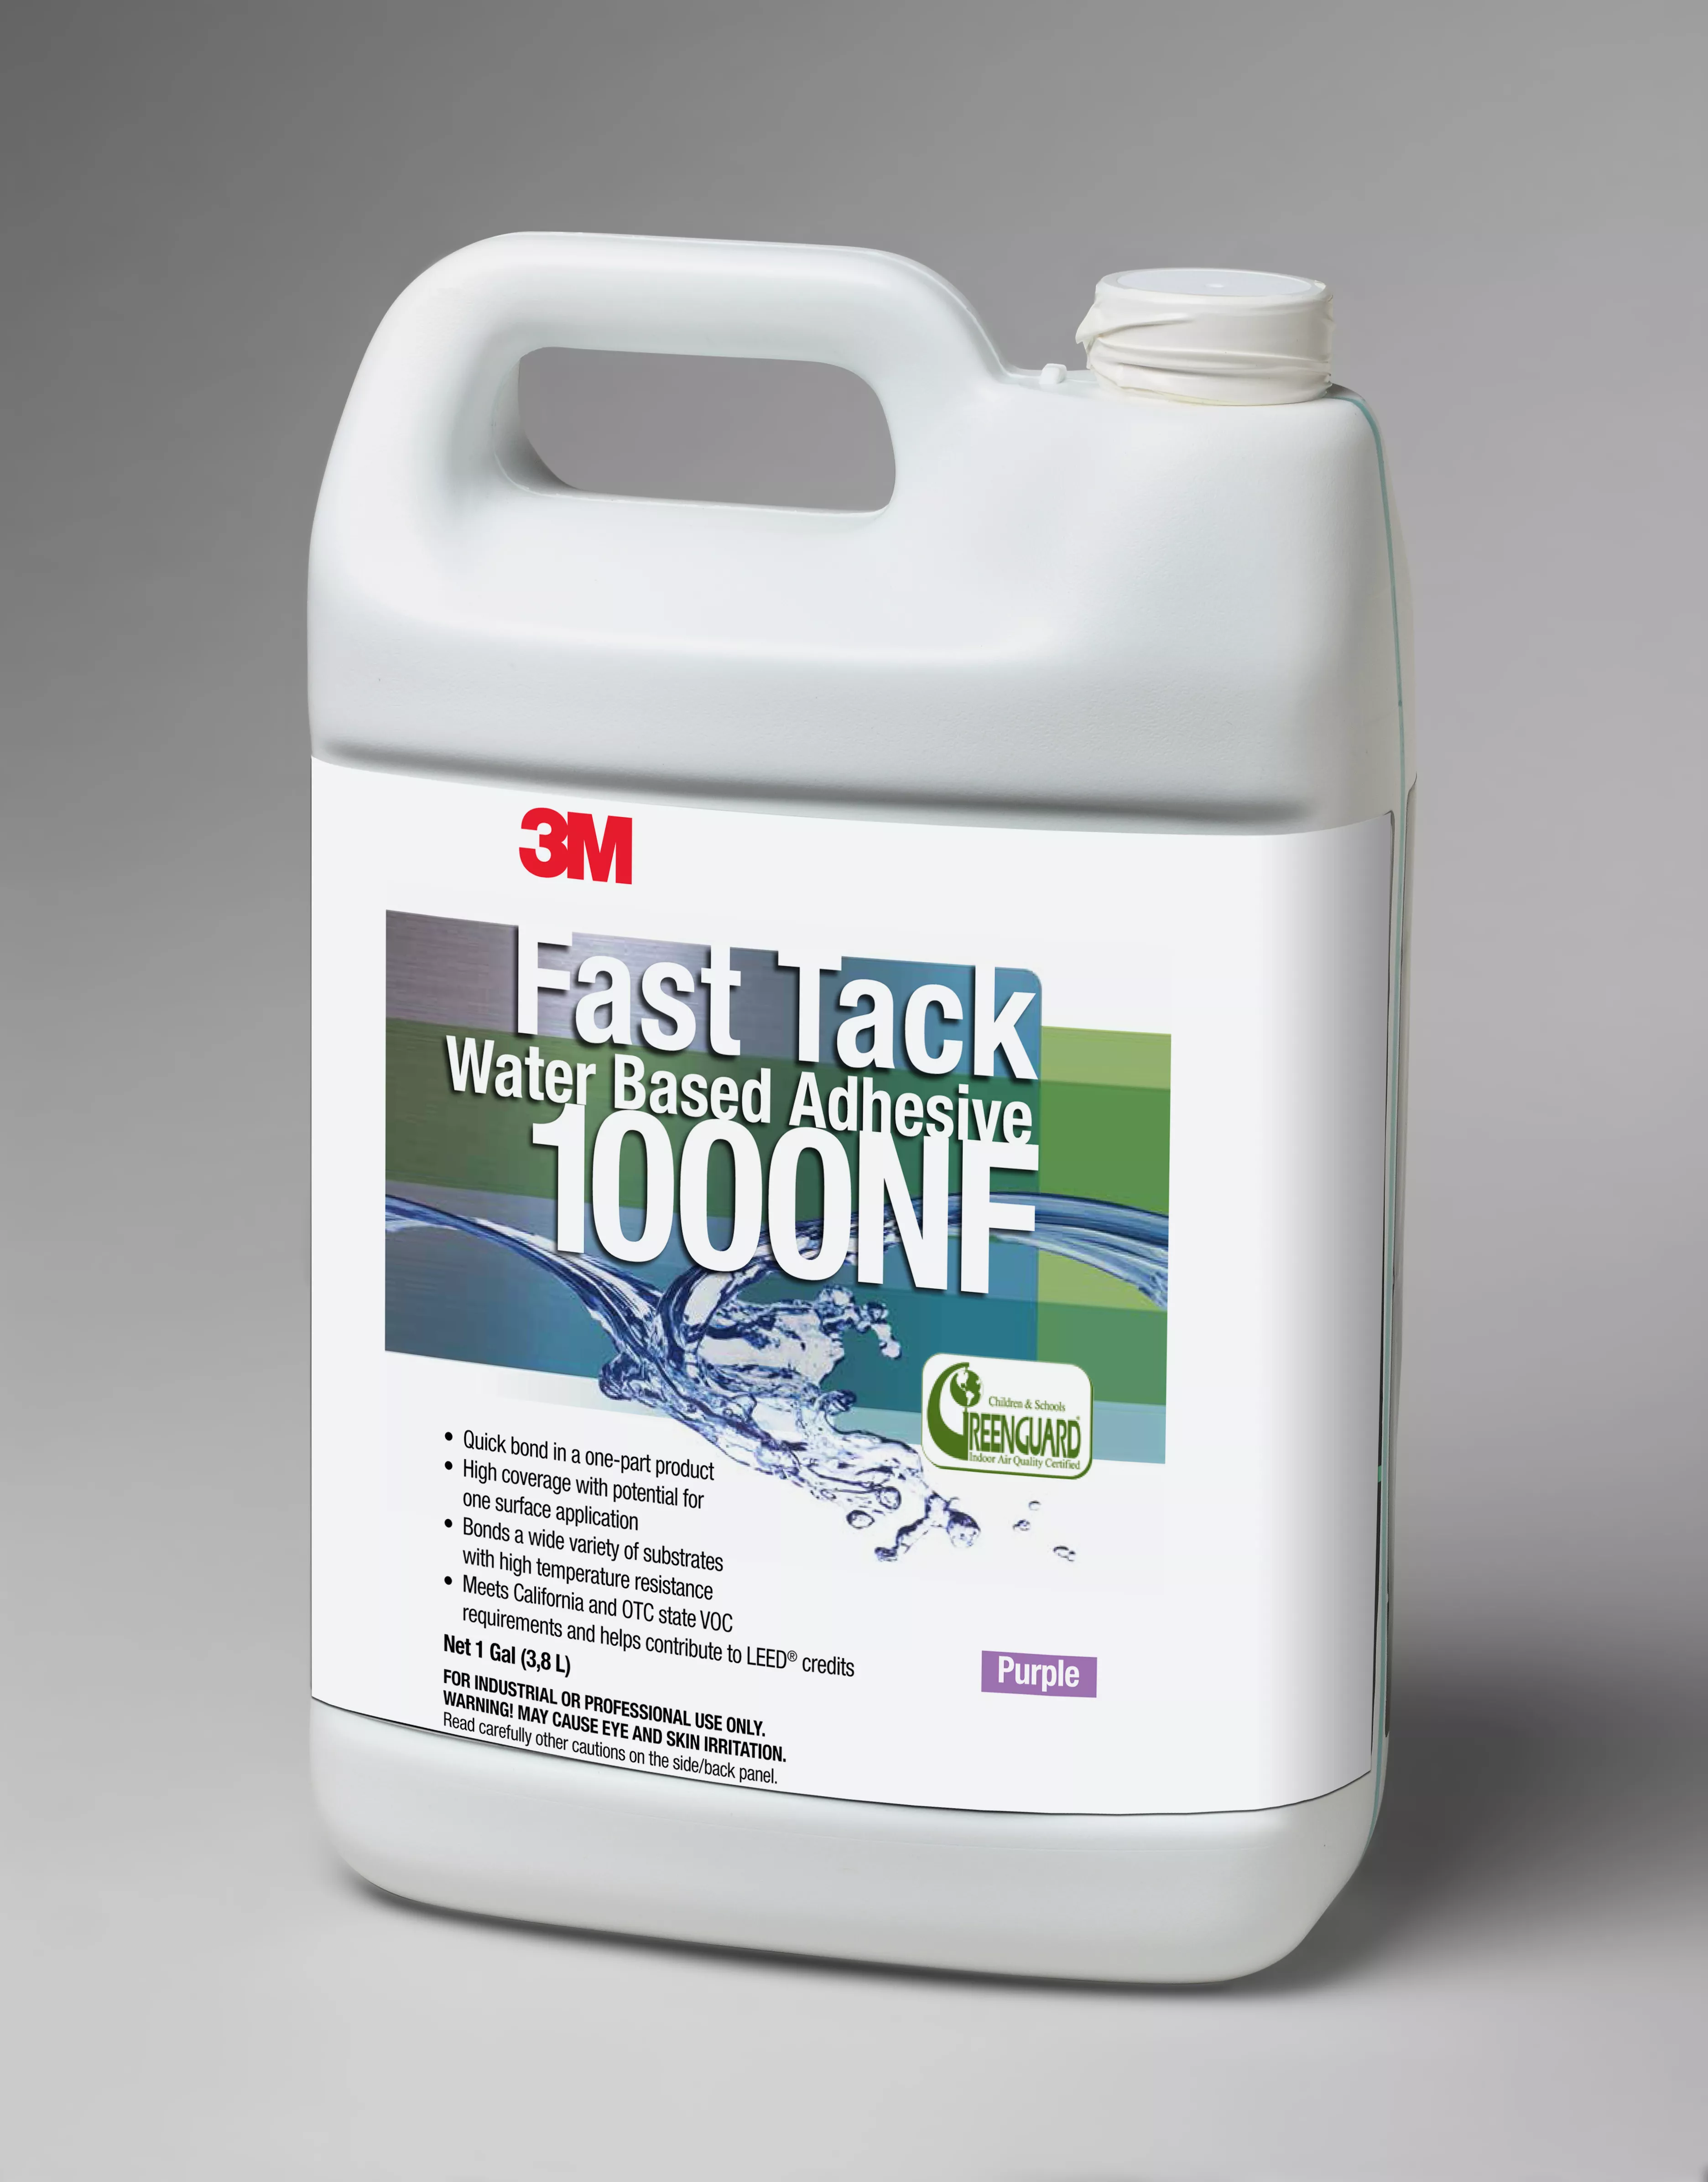 3M™ Fast Tack Water Based Adhesive 1000NF, Purple, 1 Gallon, 4 Each/Case